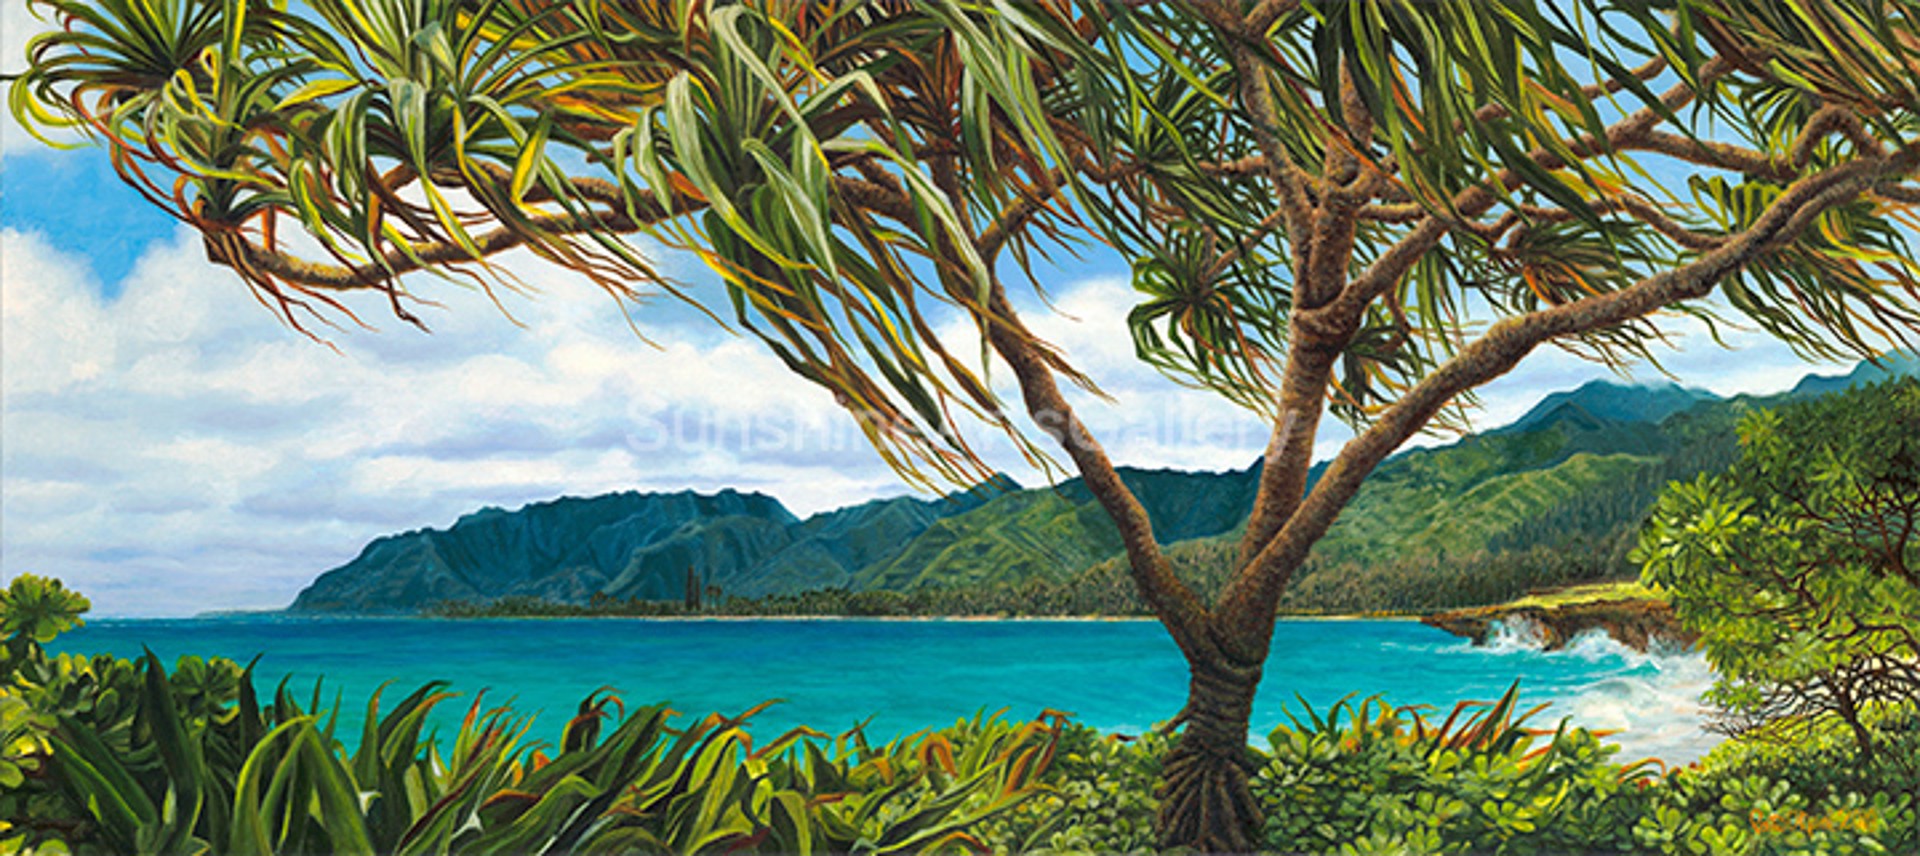 Laie Lauhala Redux by Pati O'Neal